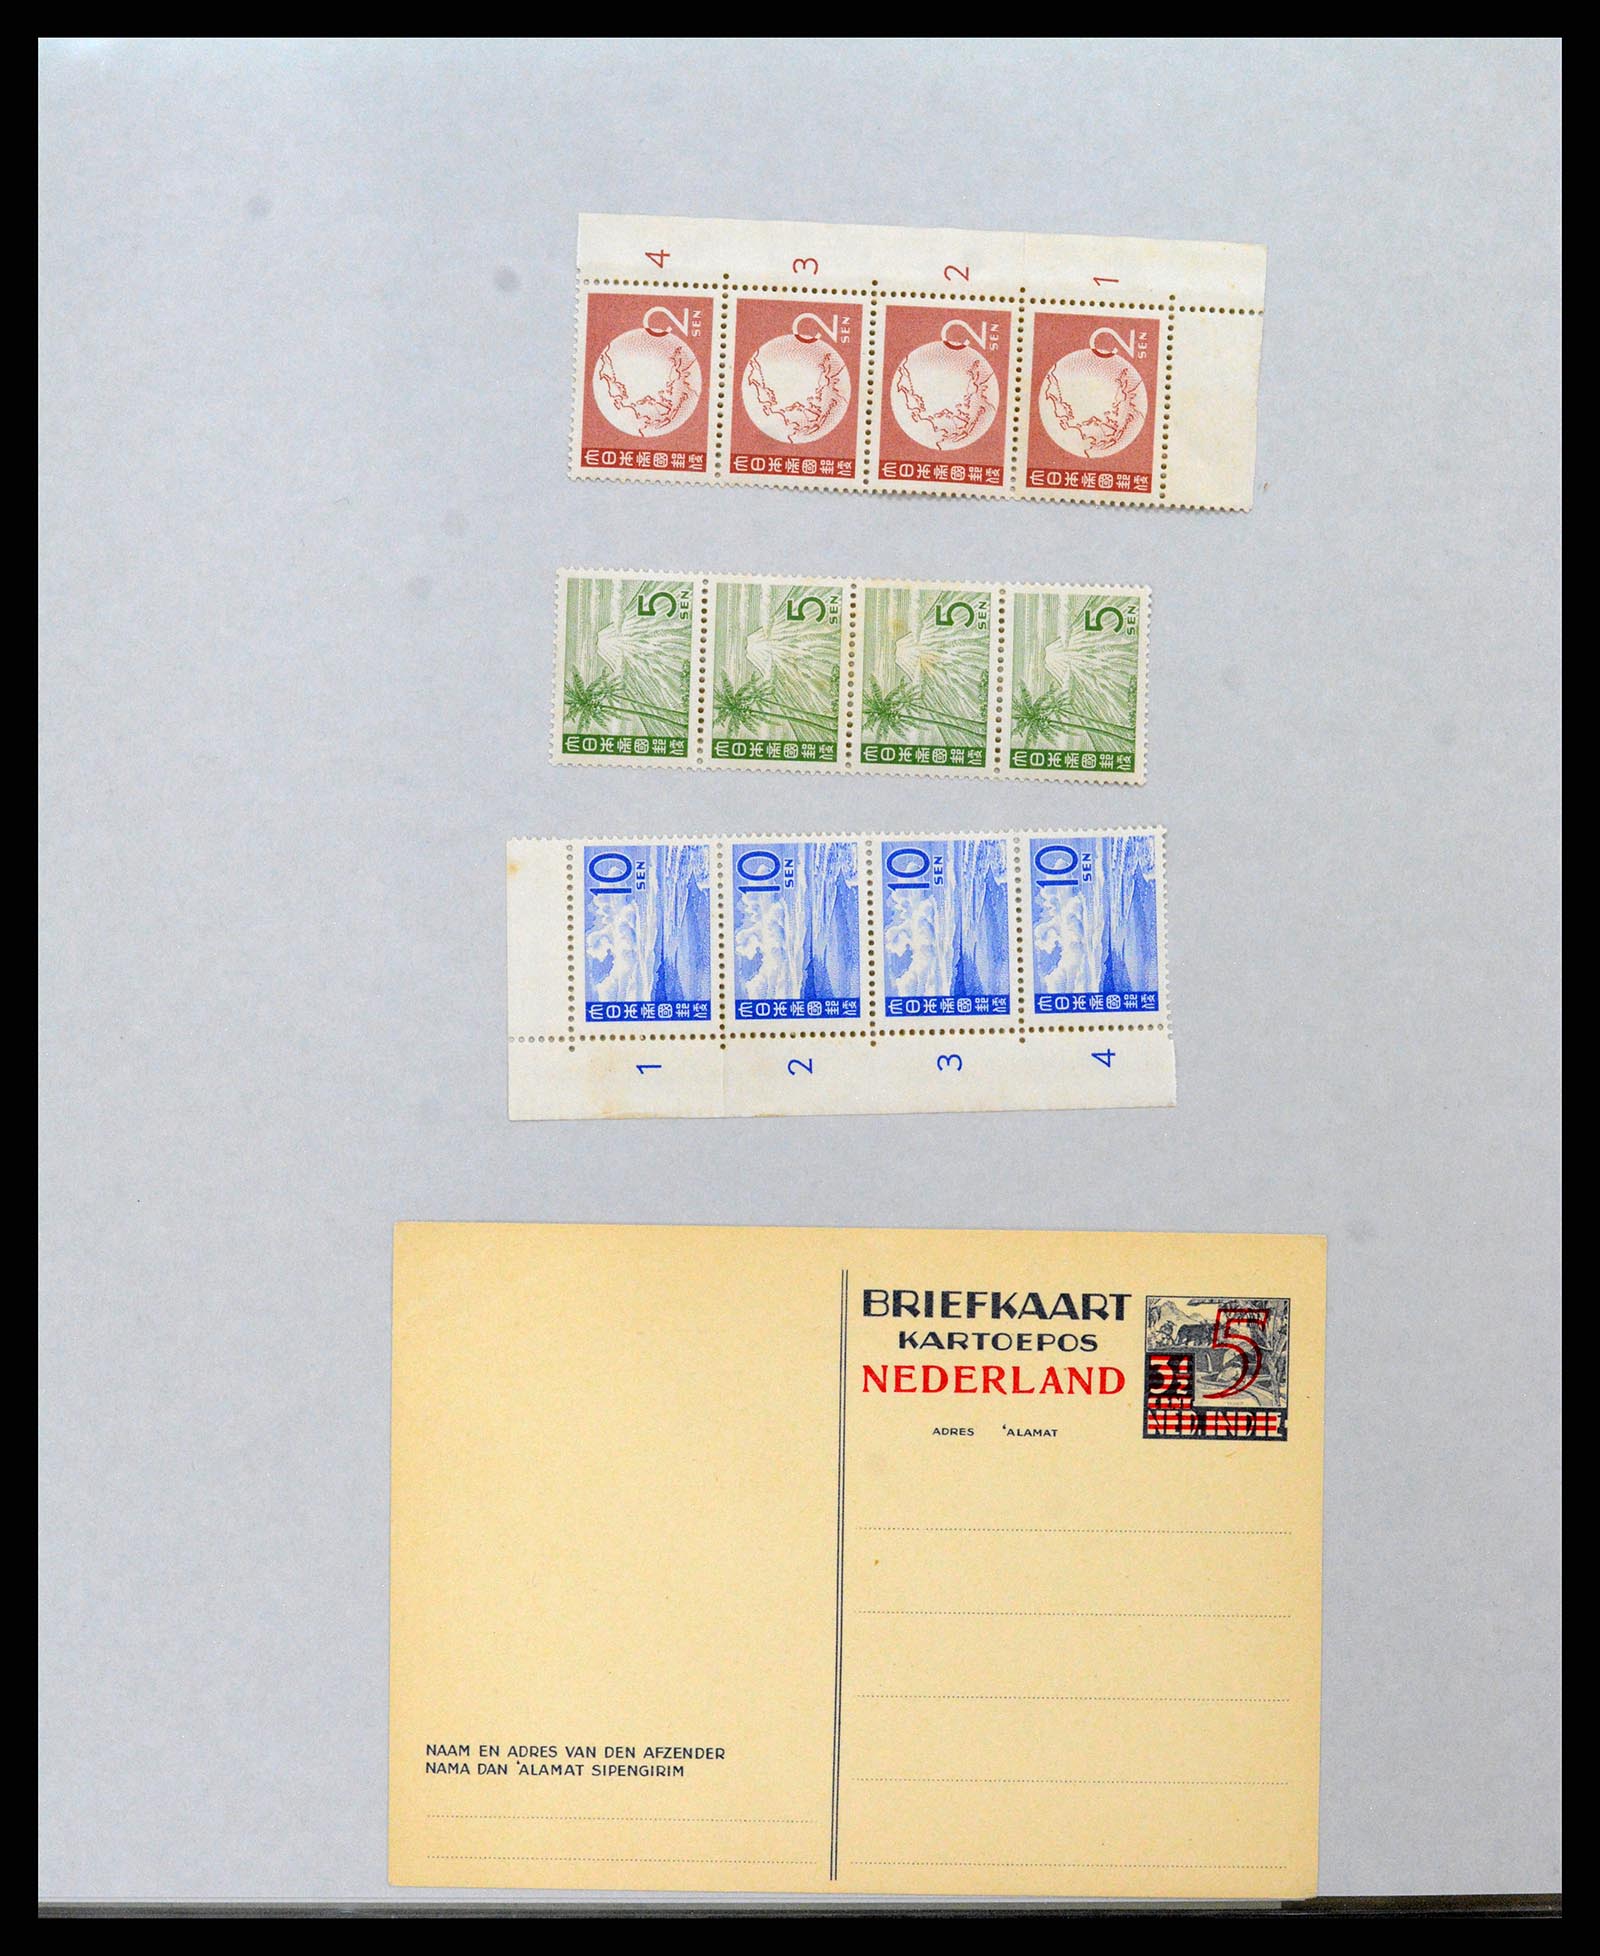 37689 030 - Stamp collection 37689 Japanese occupation Dutch East Indies and interim